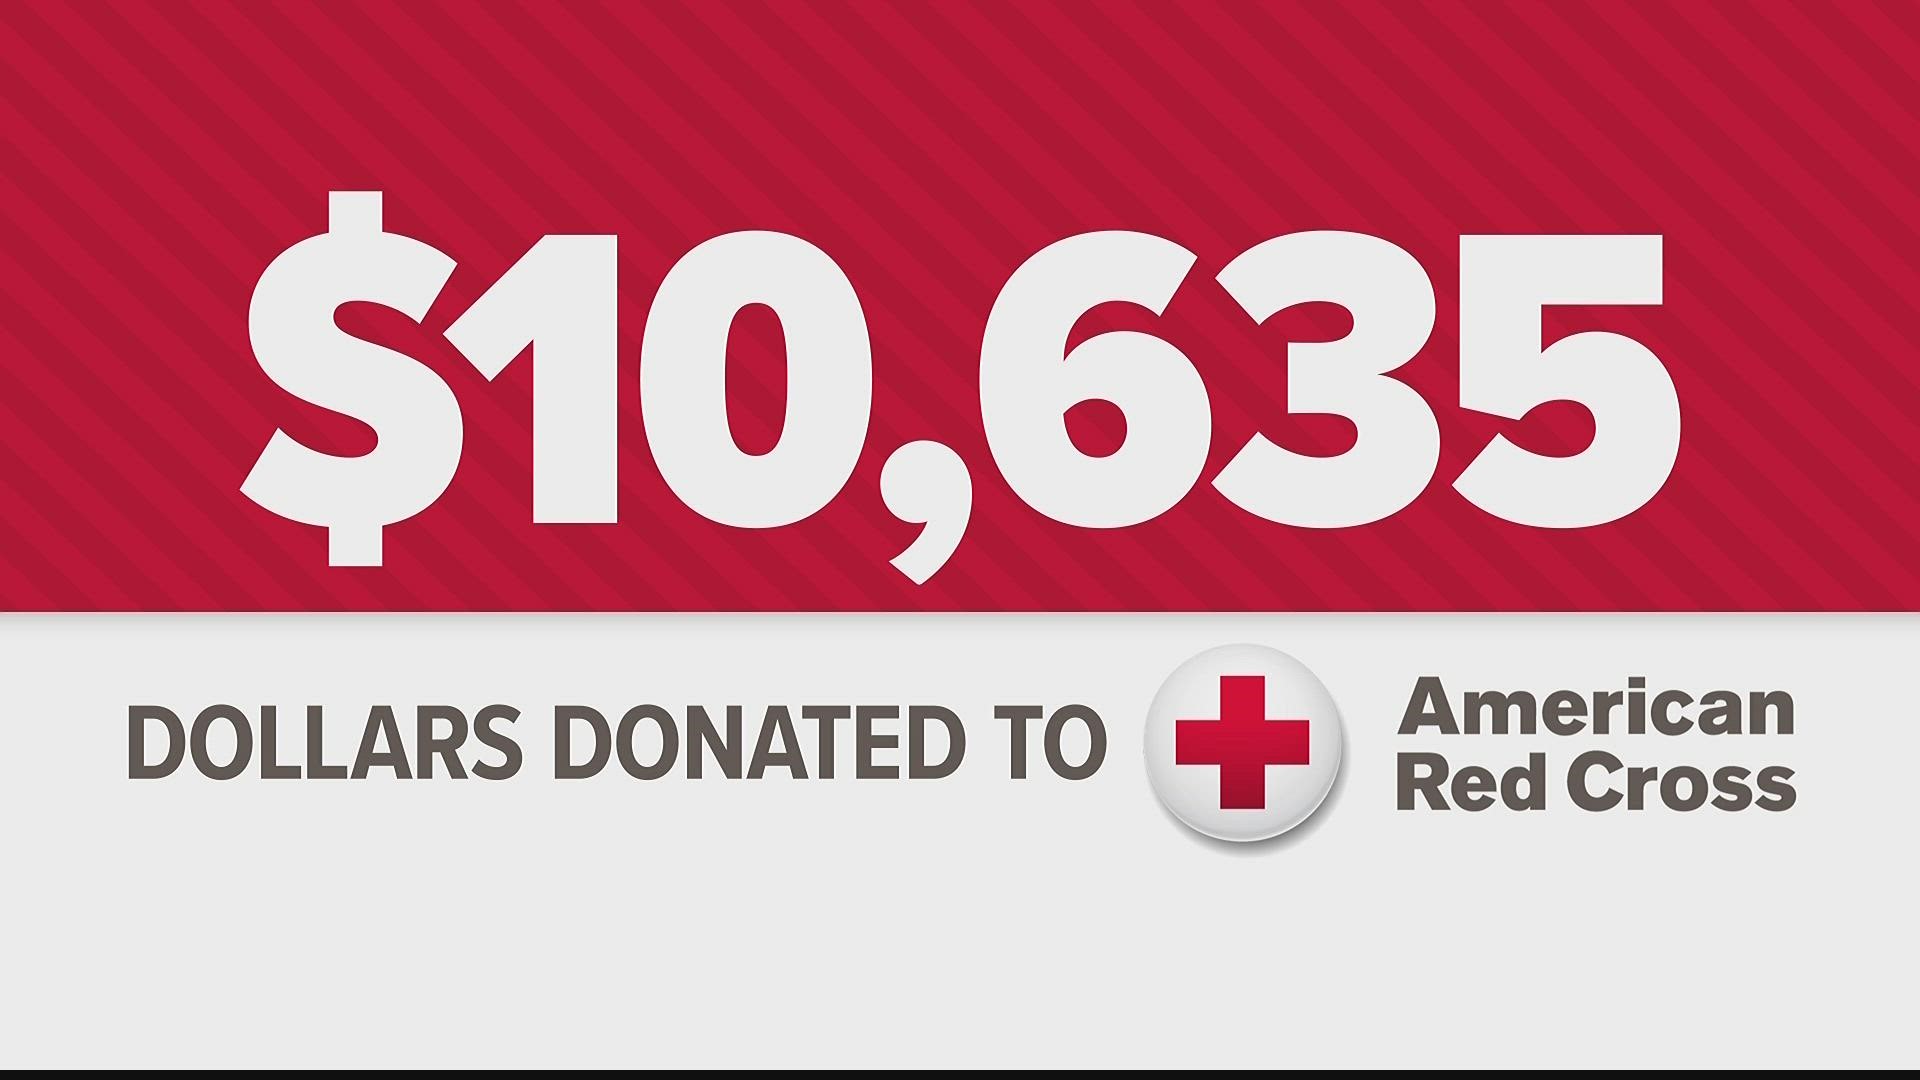 People donated $10,635 to Hurricane Ian relief efforts.